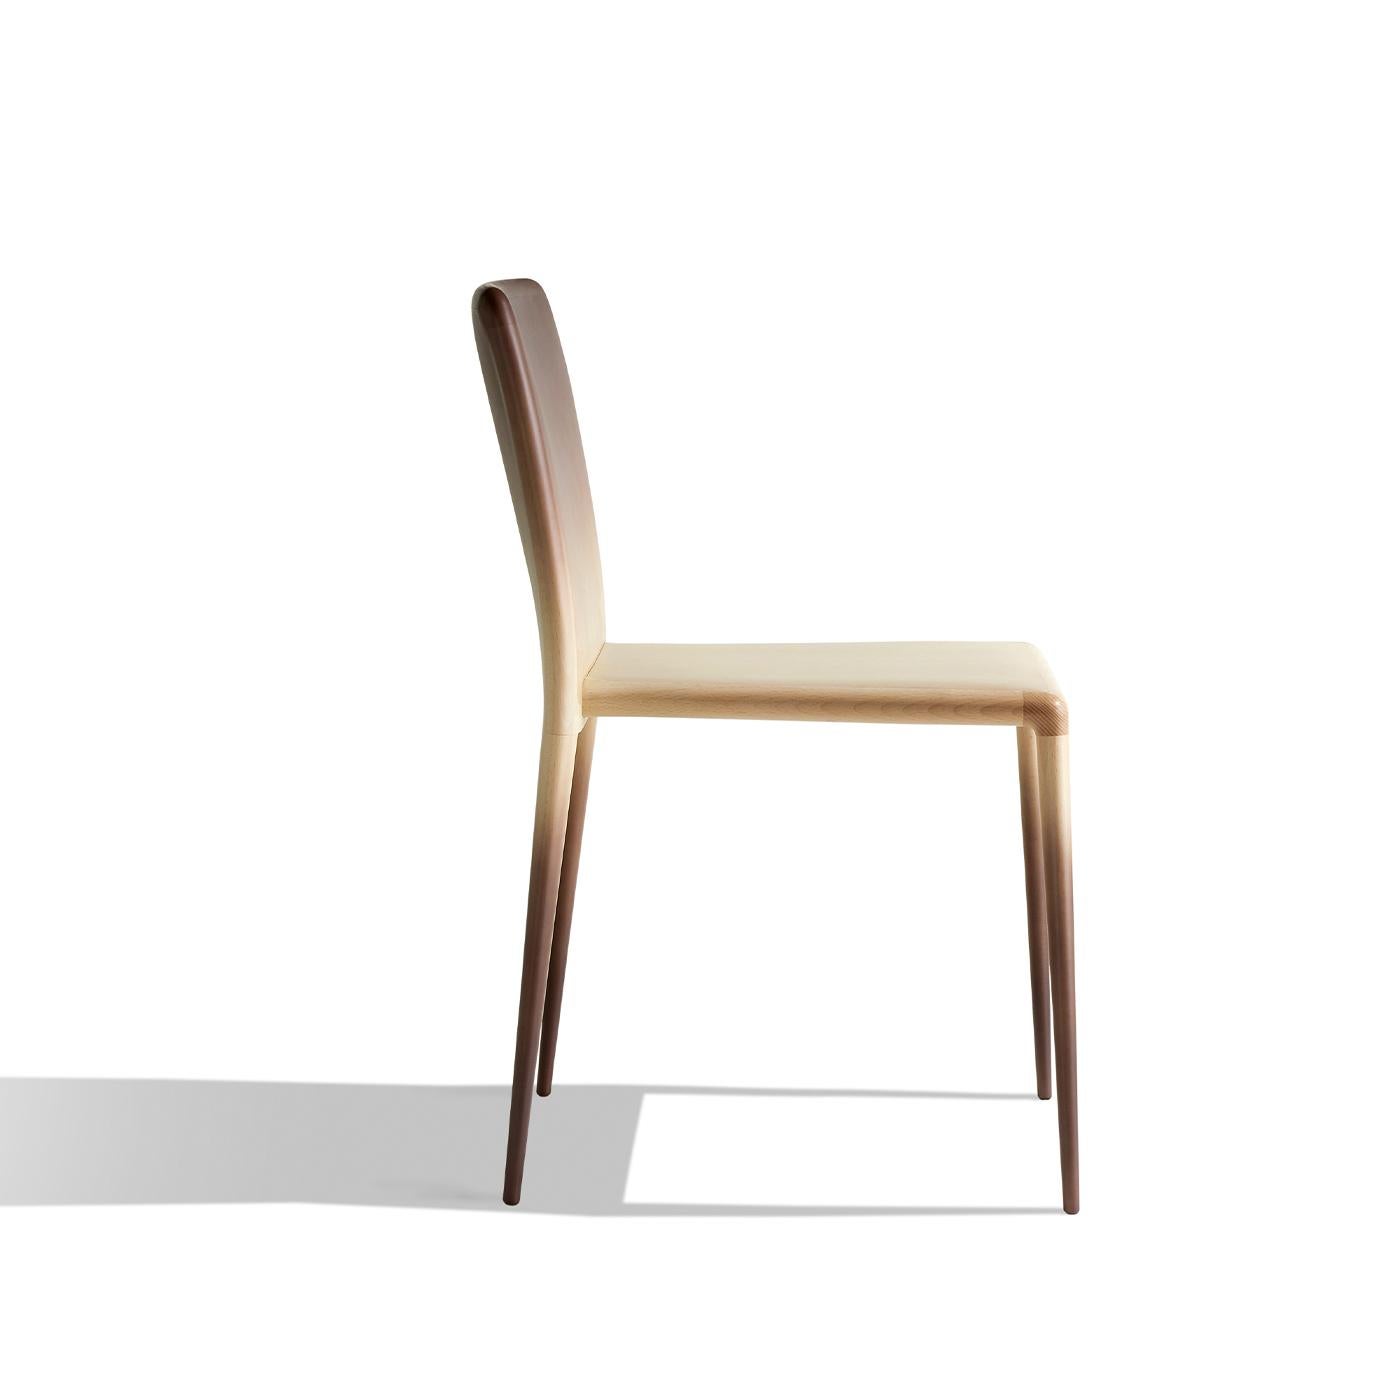 Elegance in its purest form, this chair combines airy and sturdy qualities in a perfectly clean-lined wooden silhouette that recreates the delicate flair of refined fabrics. Crafted of solid beech following highly technological procedures, it is